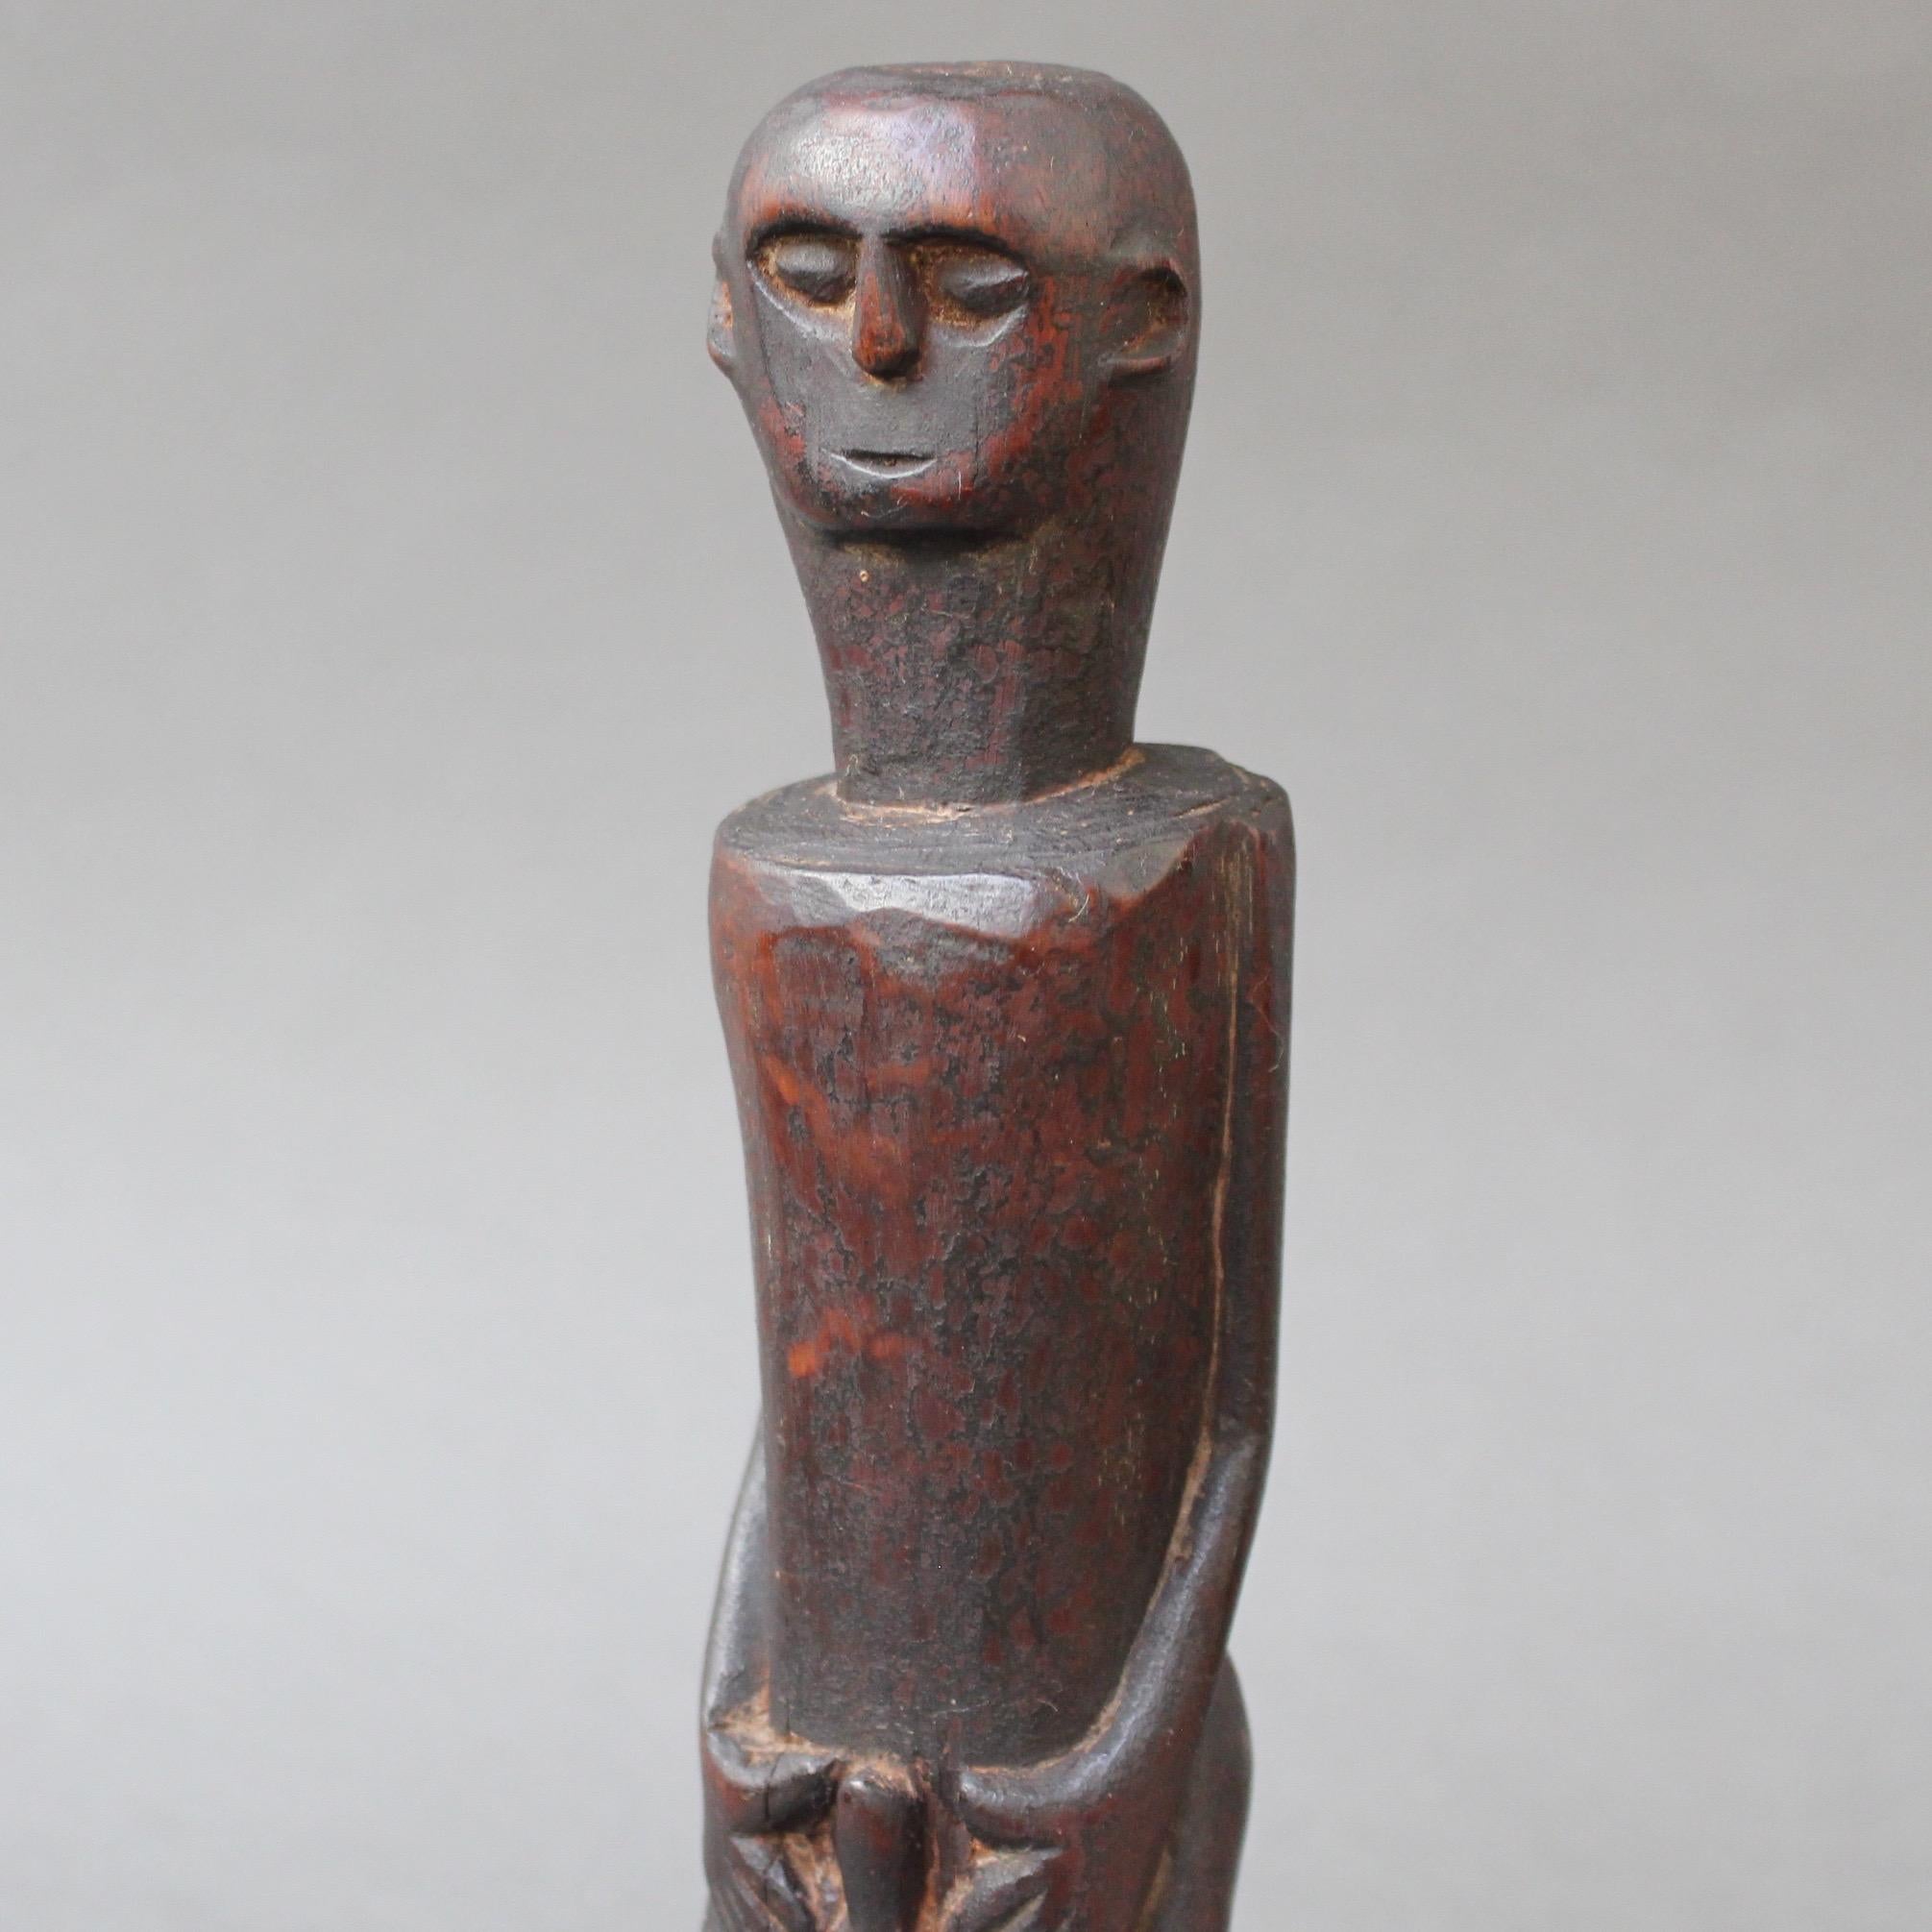 Wooden Sculpture or Carving of Fertility Figure from Sumba Island, Indonesia 5